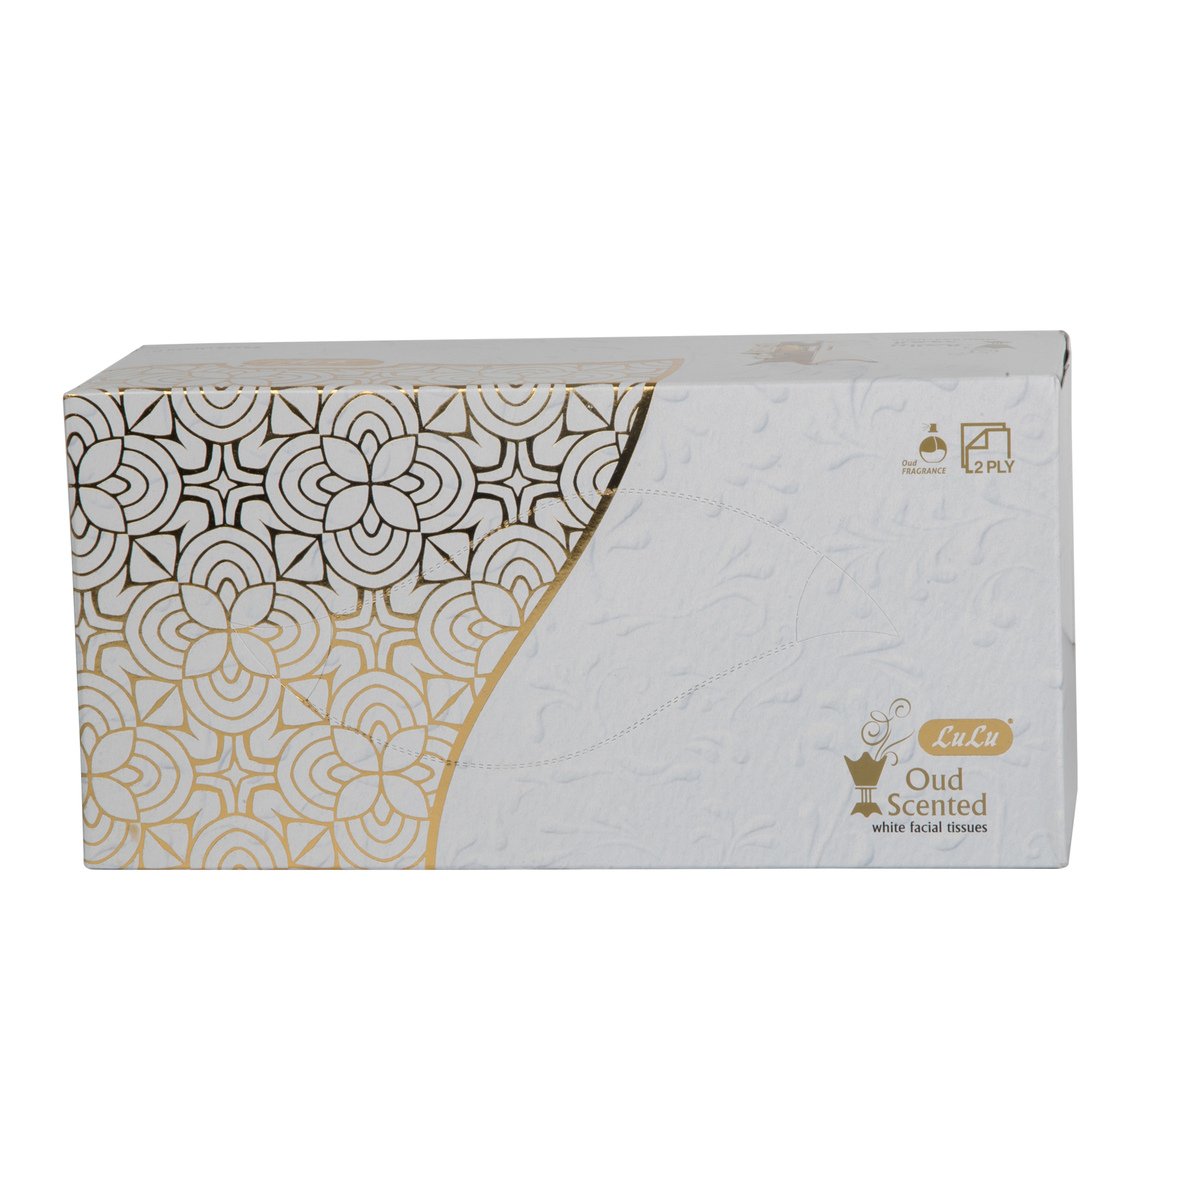 Lulu Oud Scented White Facial Tissues 2ply 200pcs